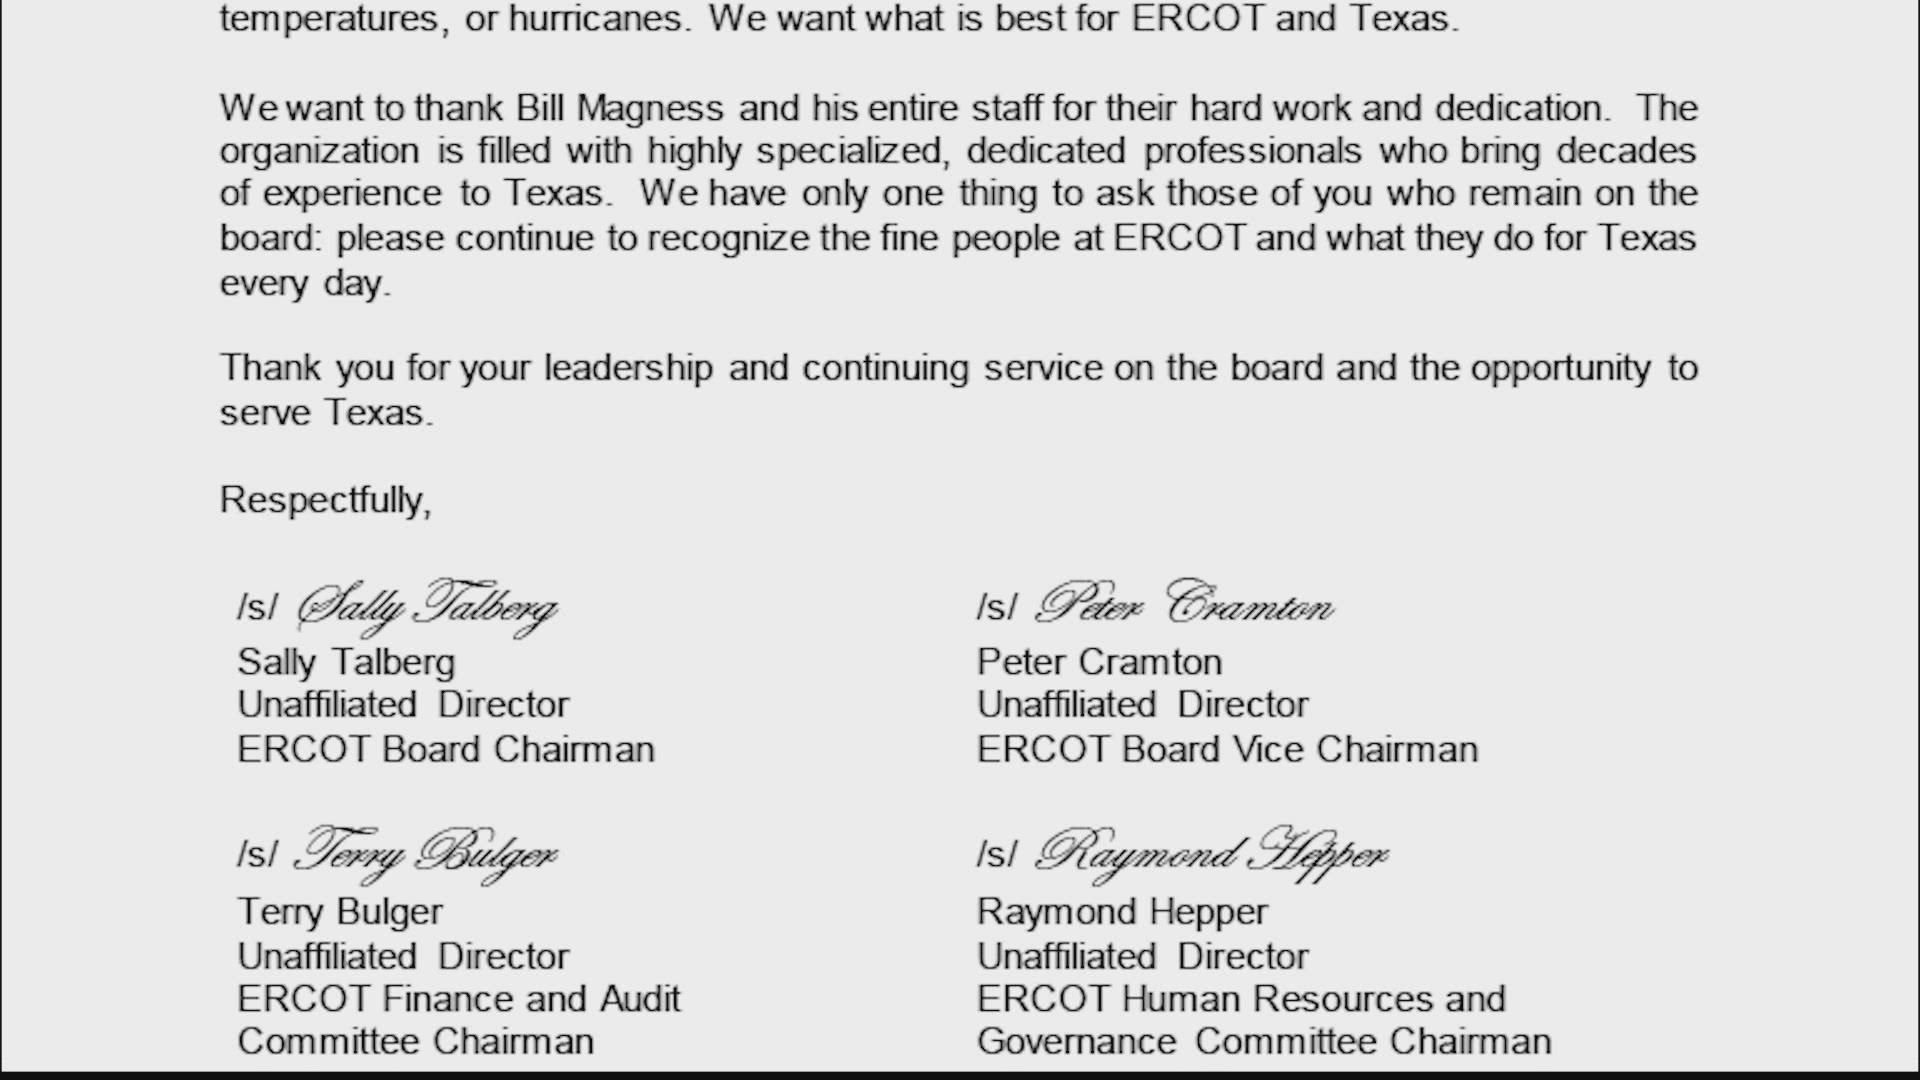 Raymond Hepper was one the ERCOT board, and resigned along with other members who records show live outside of Texas.